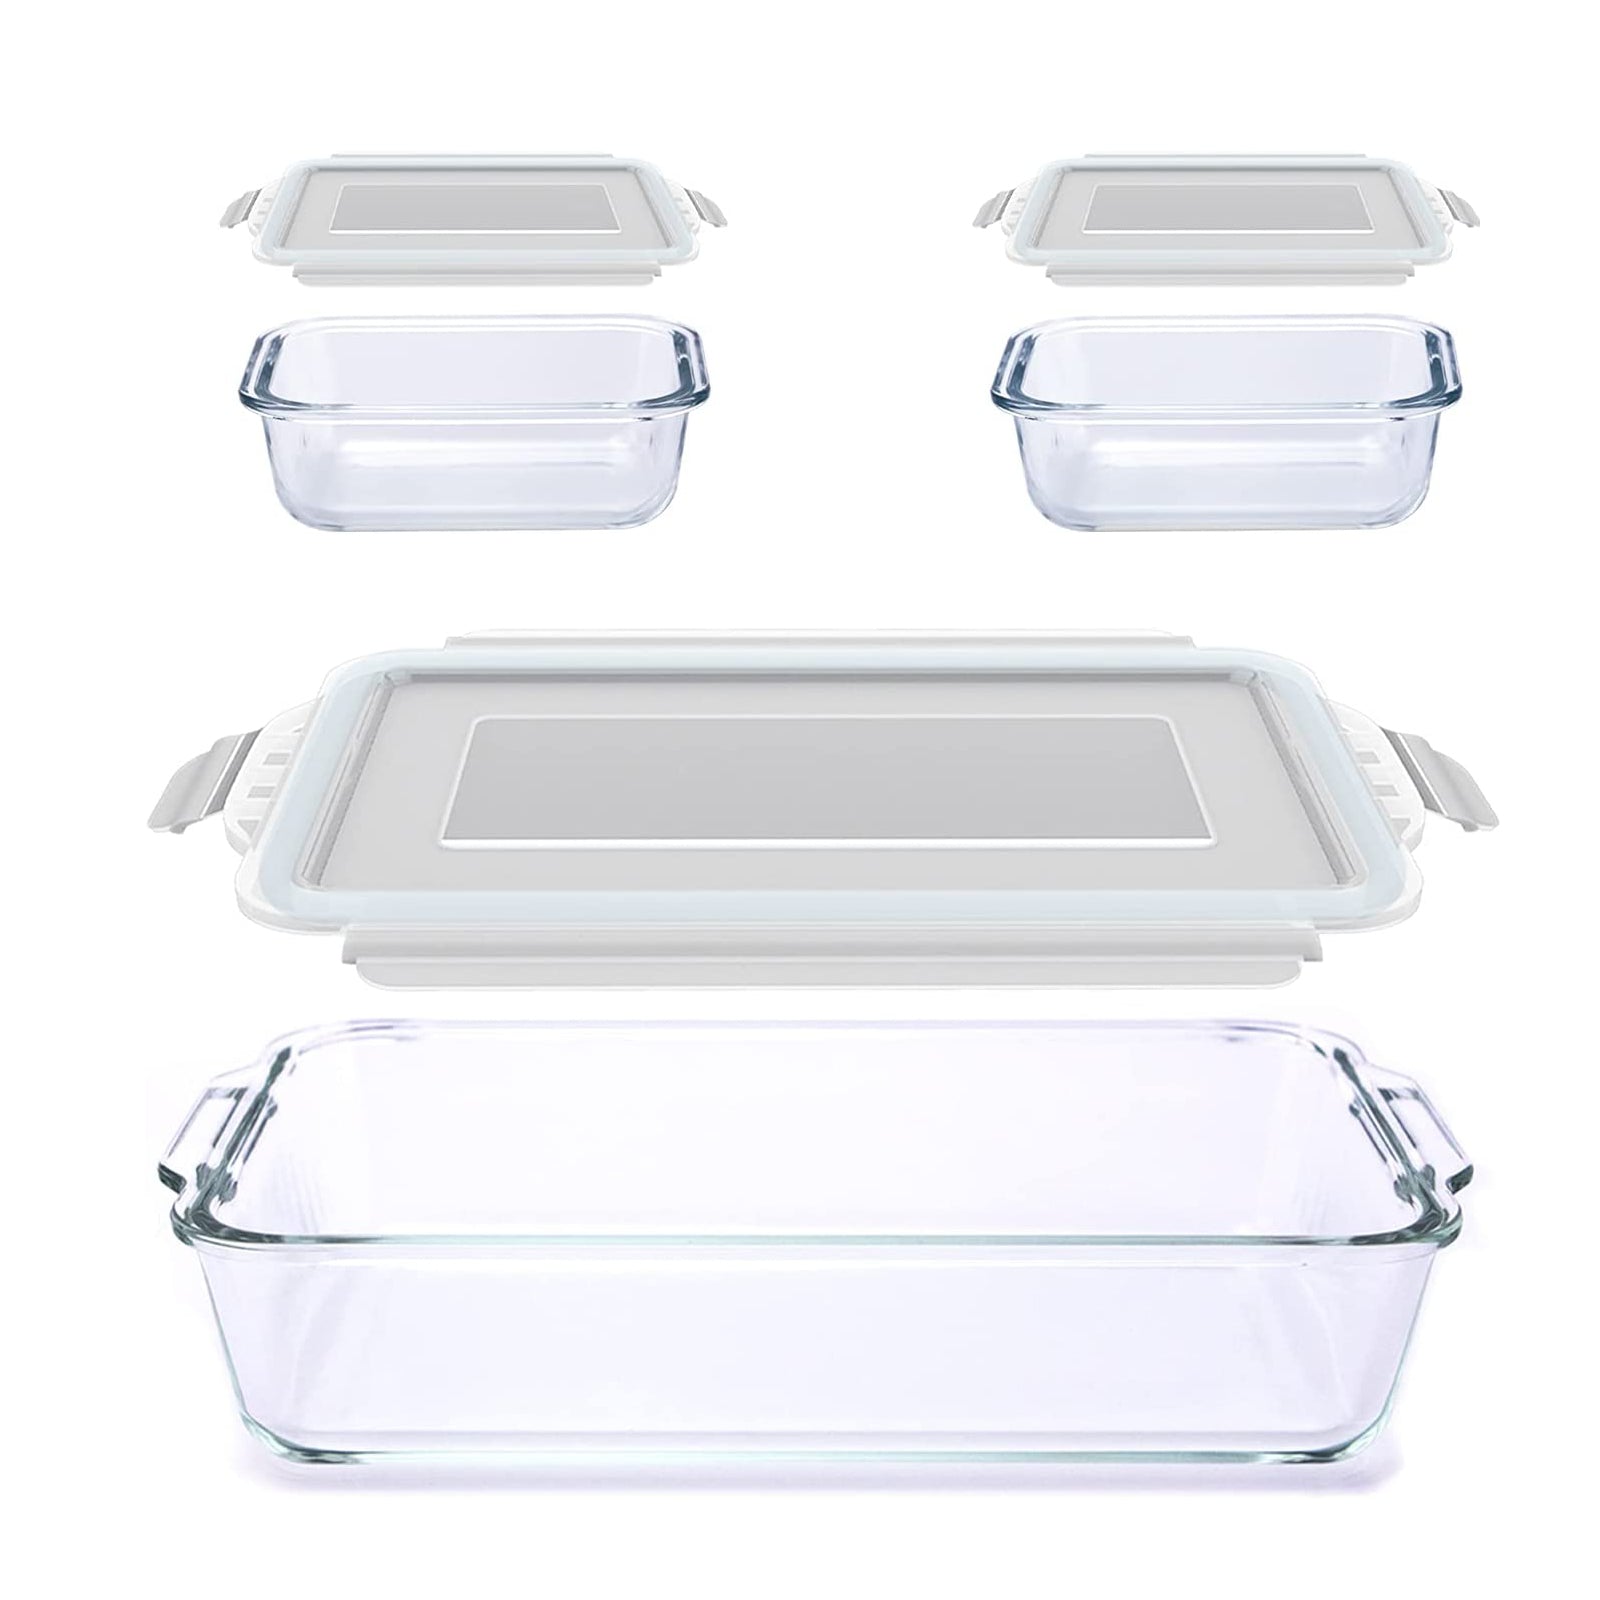 8-Piece Glass Bakeware Set with Lids, Rectangular Glass Baking Dish with  BPA-Free Lid, Glass Pans for Baking, Freezer and Oven Safe